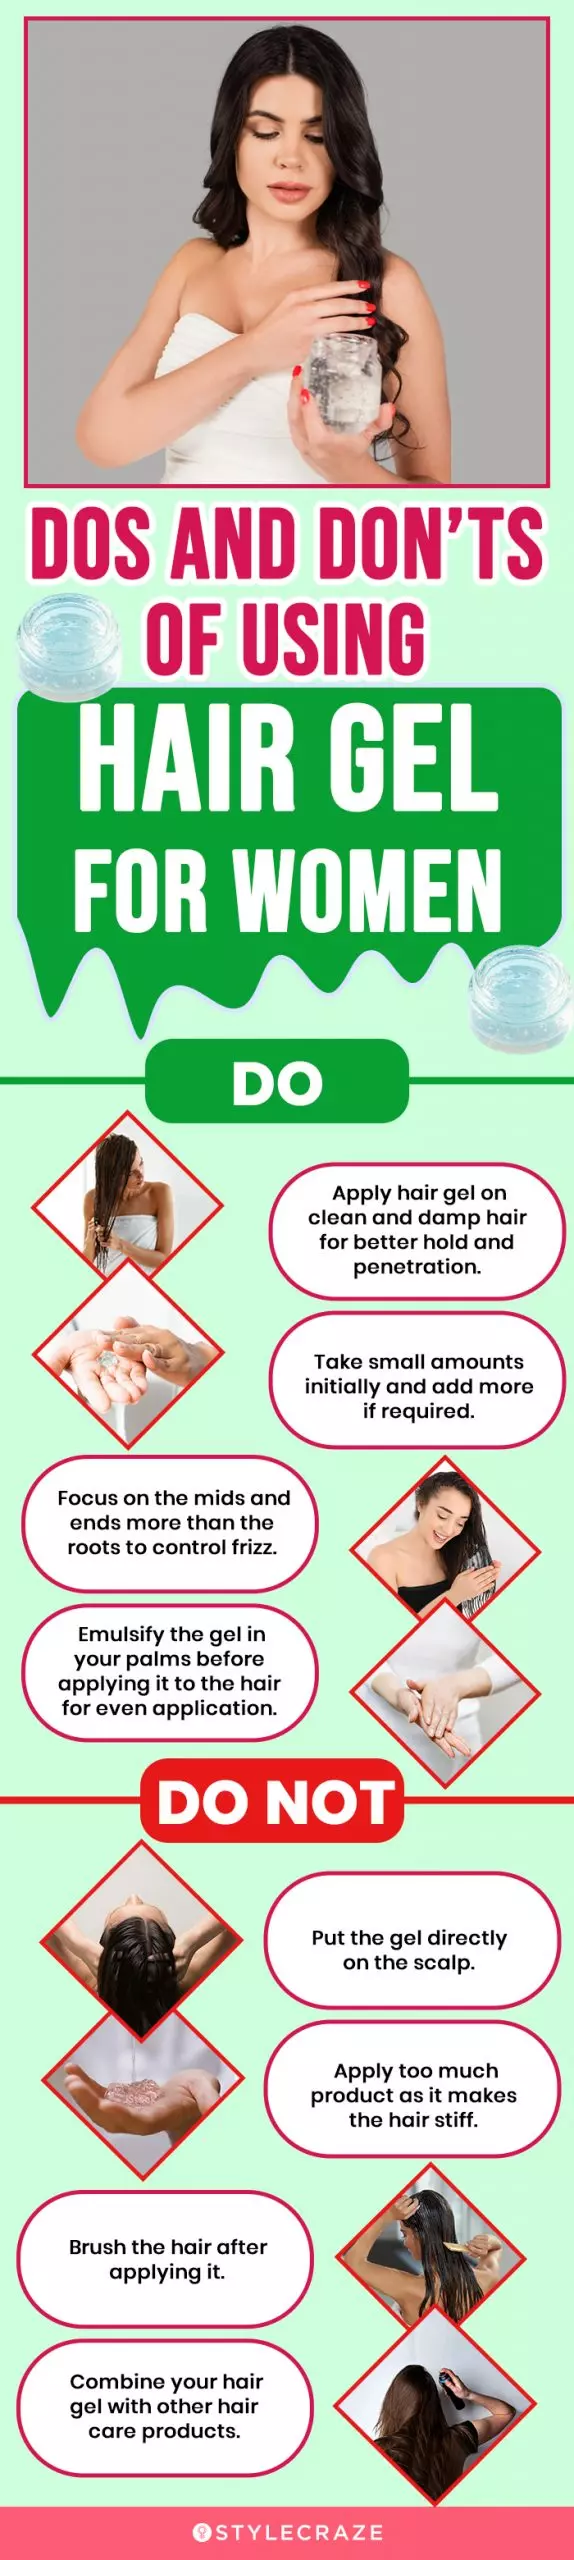 Dos And Don’ts Of Using Hair Gel For Women (infographic)